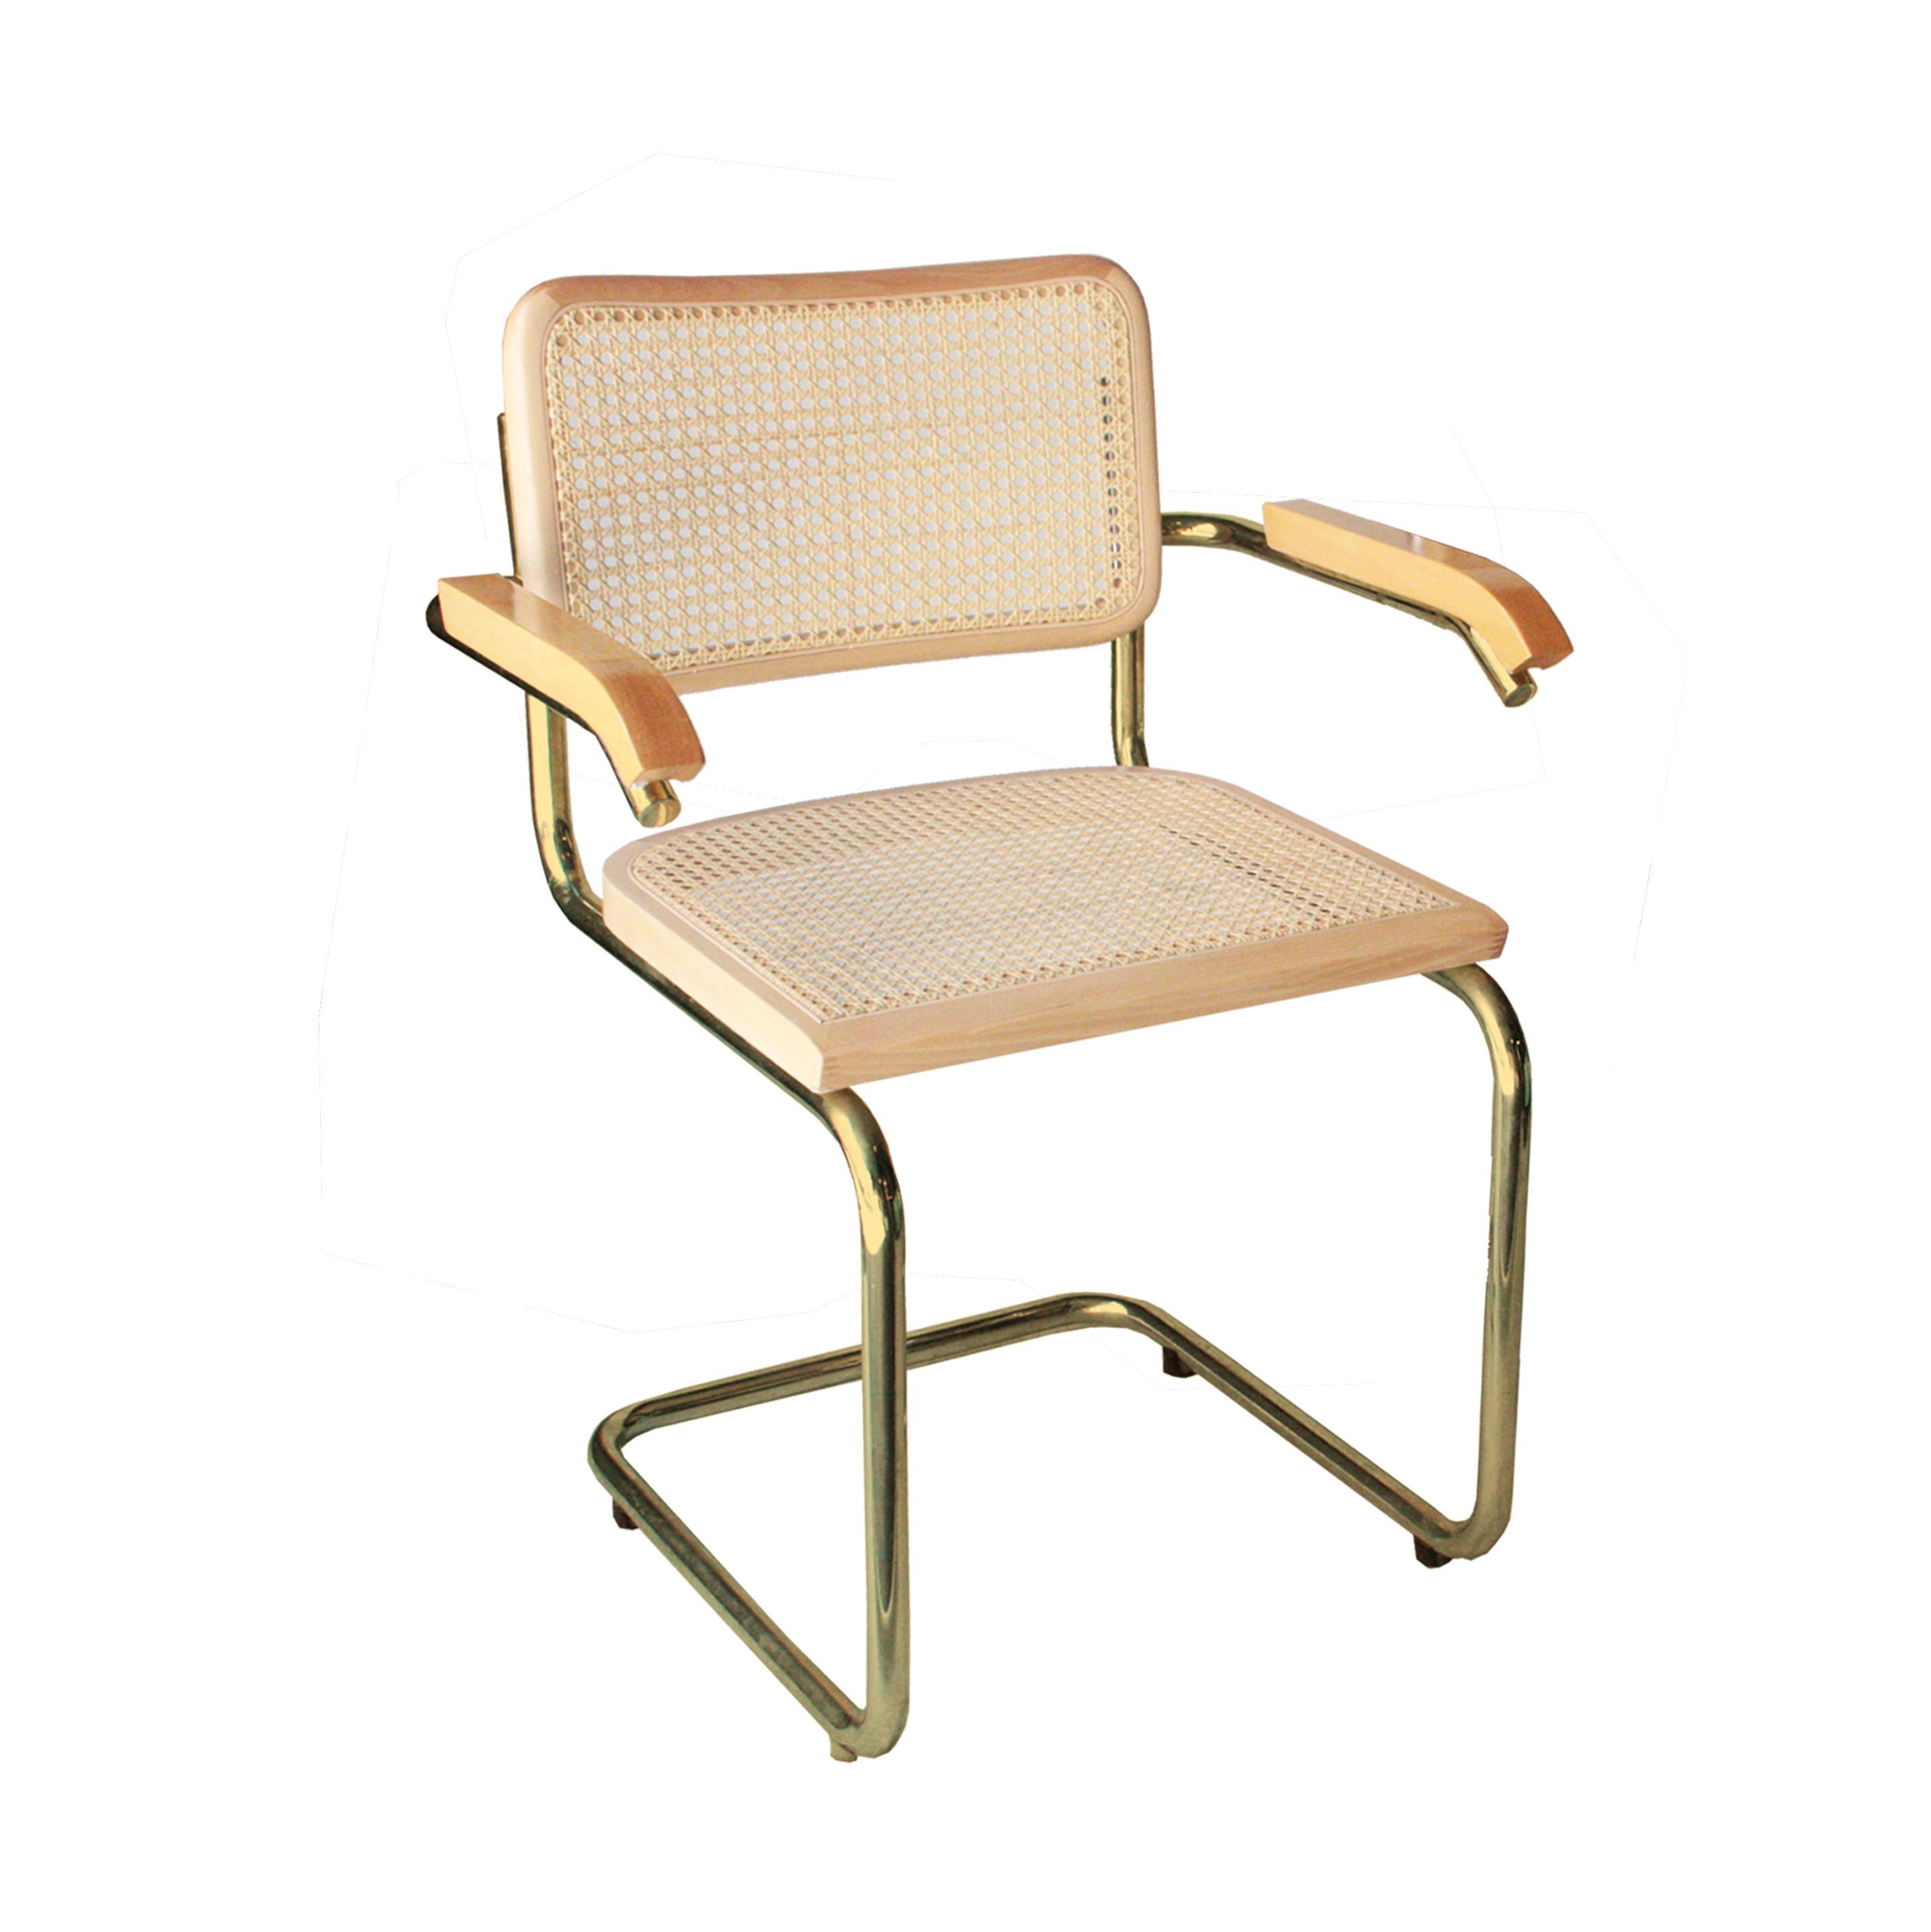 Set of 8 Cesca chairs designed by Marcel Breuer in 1962 and produced in Spain during de 1960s by MYC under the license of Gavina. Brassed tubular structure, oakwood frame with braided natural fiber seat and back.

This a set of 8 chairs, including